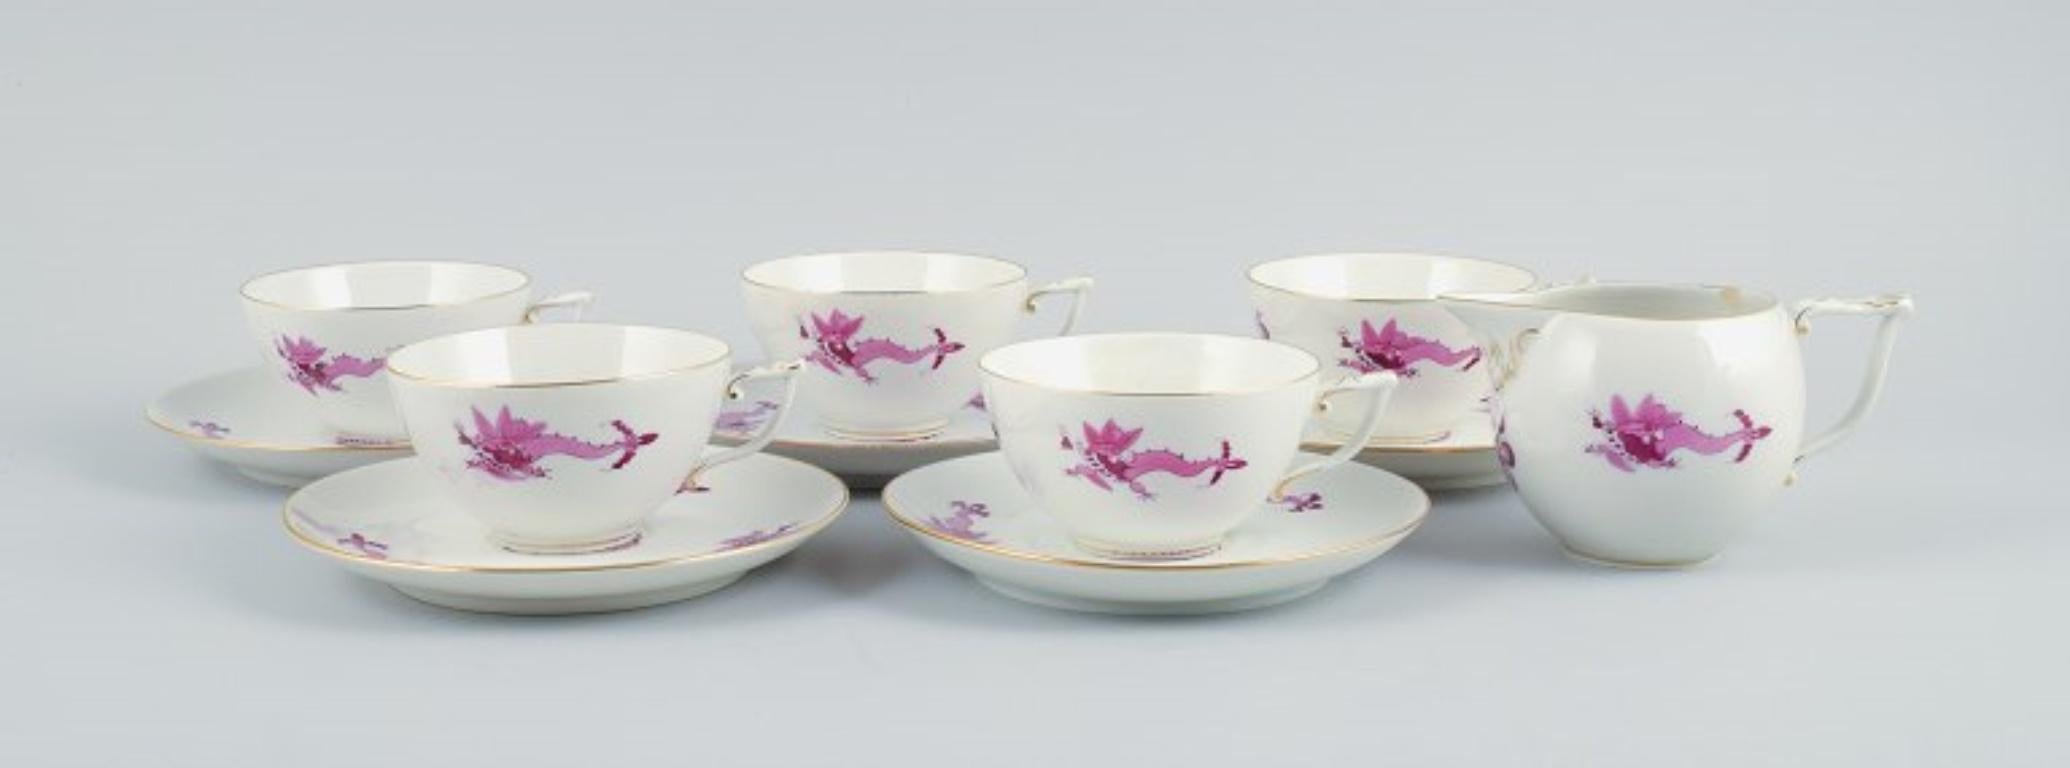 Meissen, Rich Court Dragon, a five-person purple tea service with gold decoration. Consisting of five pairs of teacups and a cream jug.
Hand-painted.
Approx. 1920.
In perfect condition.
Marked.
Third factory quality.
Cup: D 9.5 x H 5.0